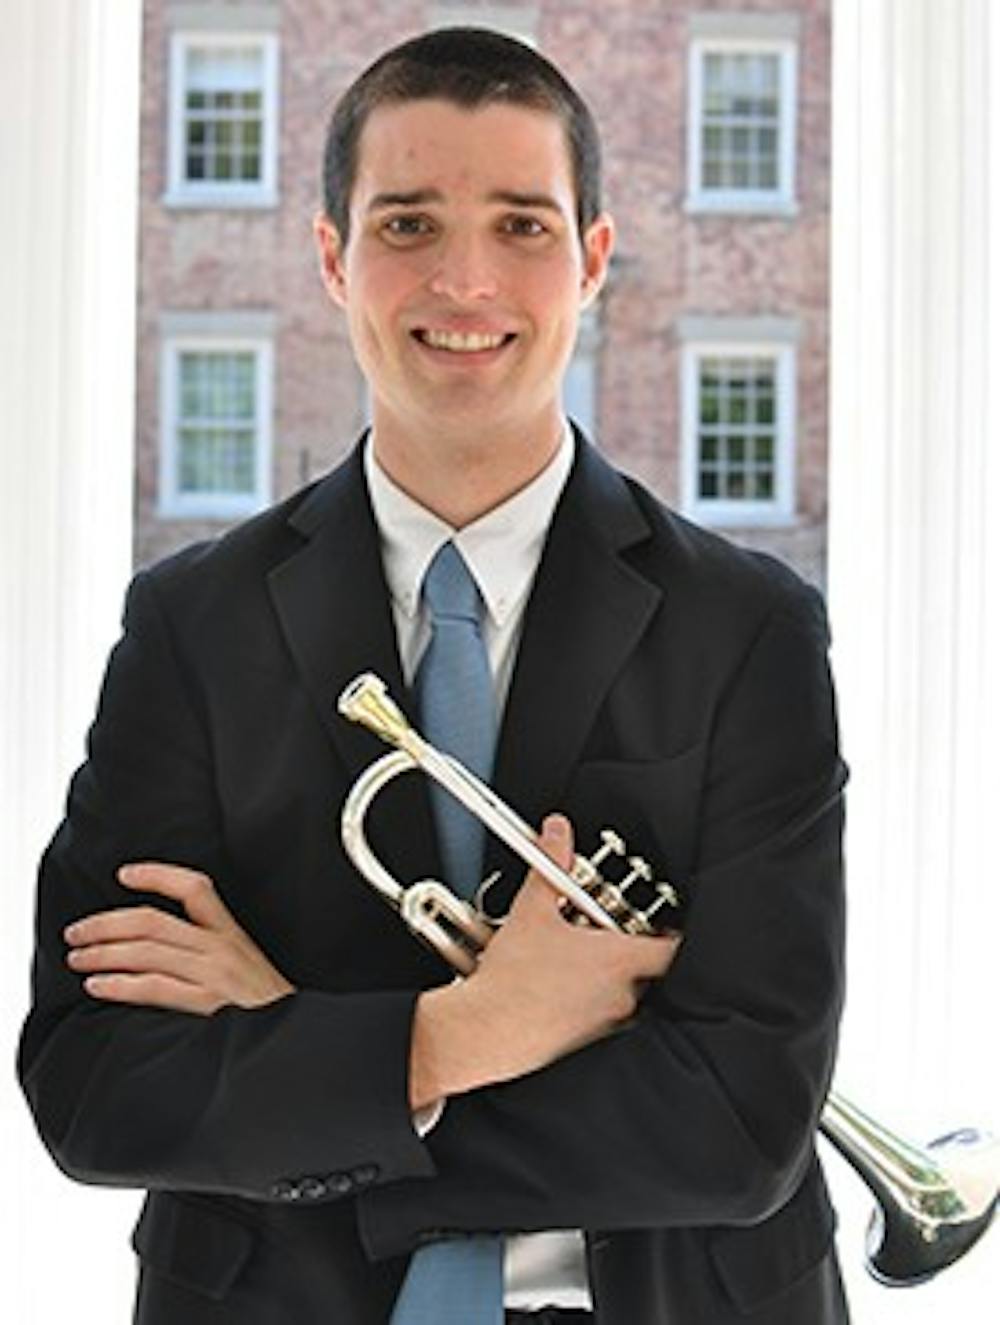 John Parker, a senior at UNC, had his world flip upside down the weekend of October 7, 2013, when he earned the position of principal trumpet in the Charlotte Symphony Orchestra. Parker beat nearly 100 other musicians who were invited to audition for the position, which he will take after this semester. Parker has played trumpet since he was 10, saying, "It's fun picking up the horn every day and experiencing something different."